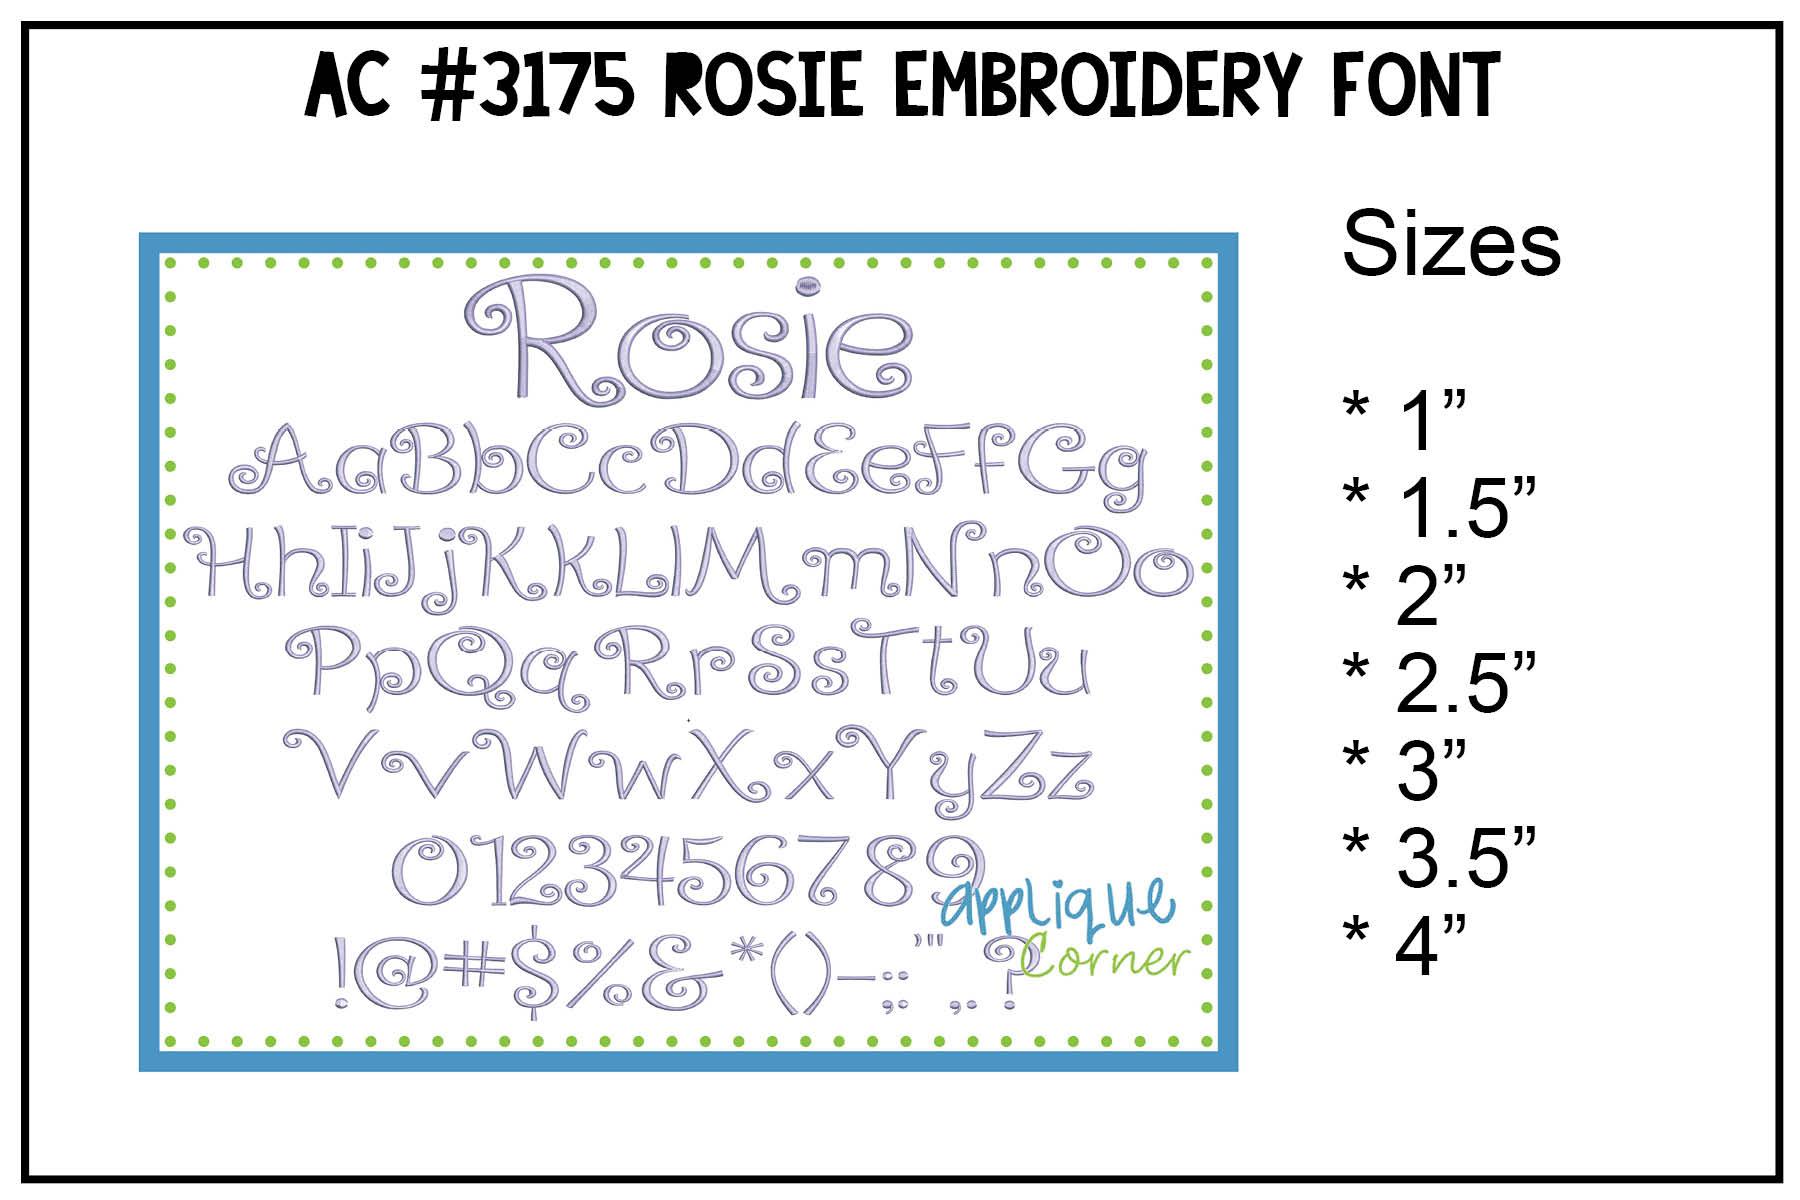 Rosie Embroidery Font